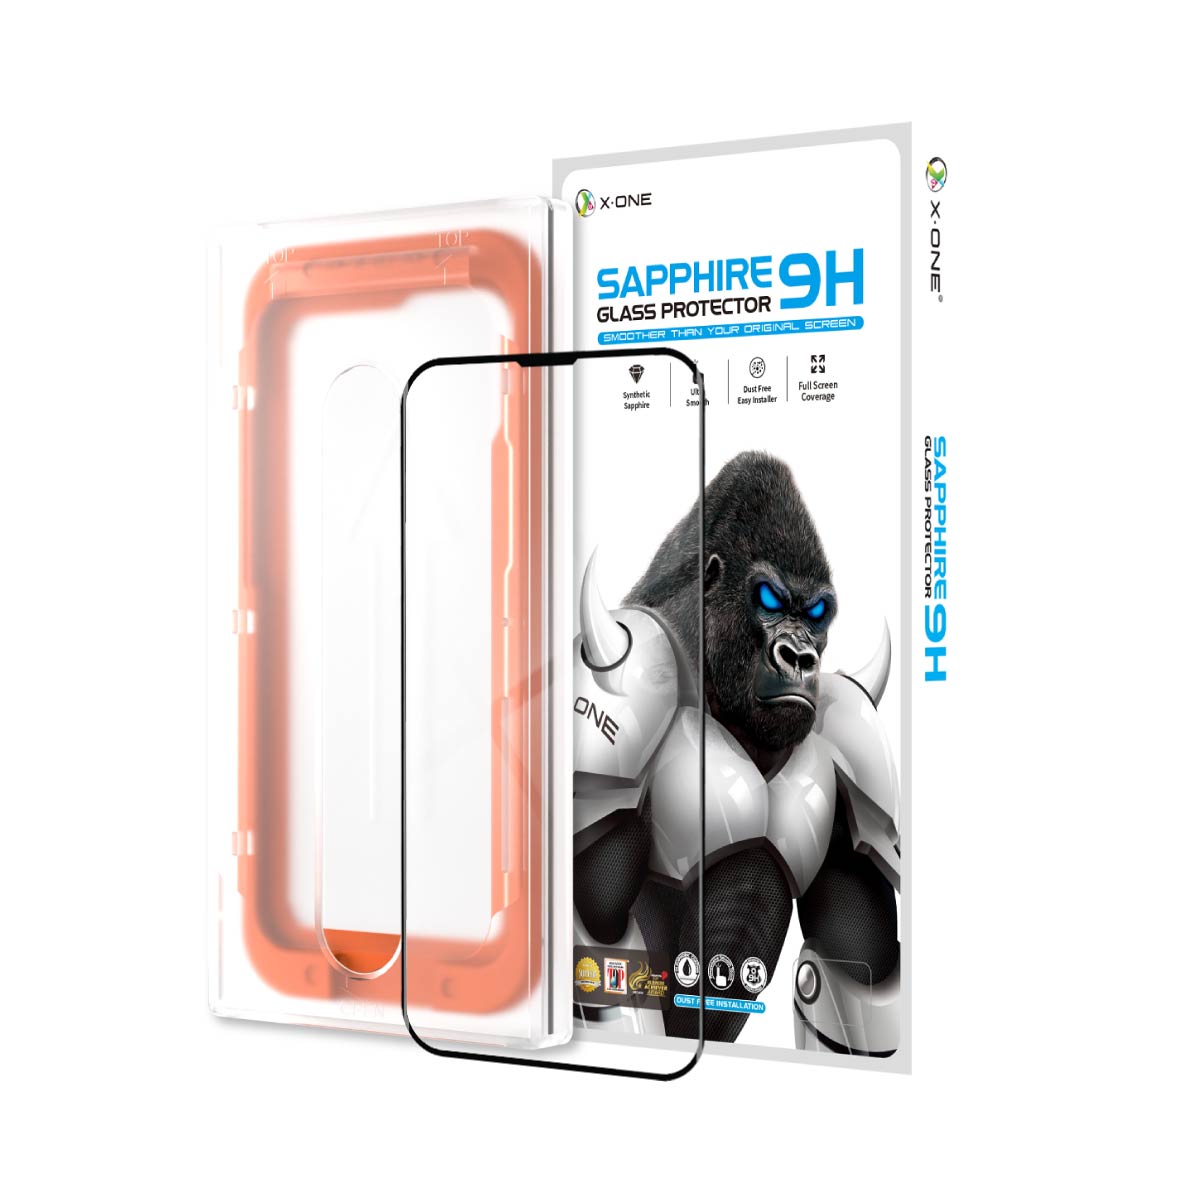 X.One® Upgraded Sapphire Coated Glass with Dust Free Installer Kit for iPhone